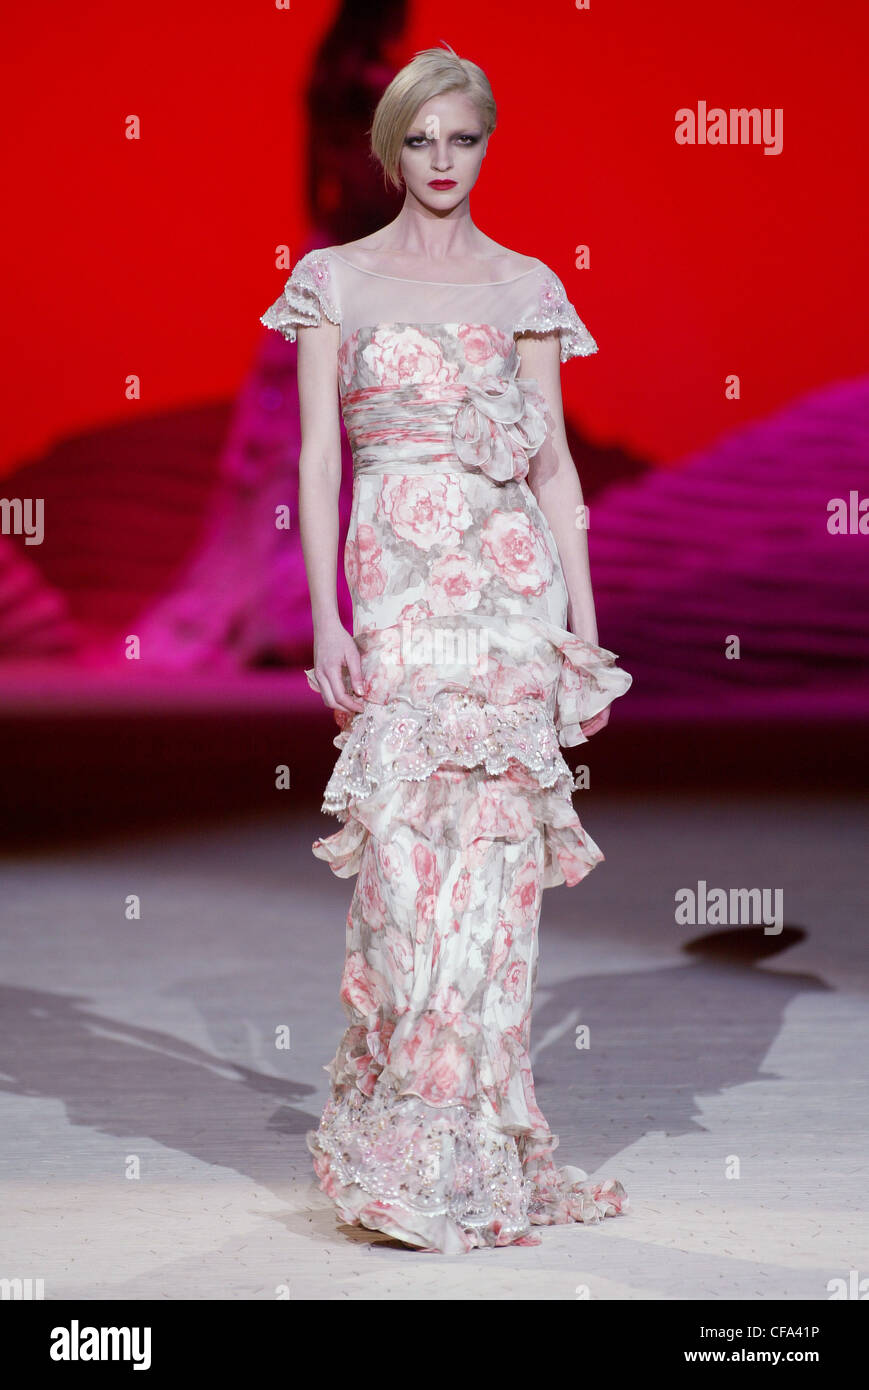 Haute Couture Valentino Spring Summer Paris Model Mariacarla Boscono  wearing a full length pale pink floral dress cap flutter Stock Photo - Alamy